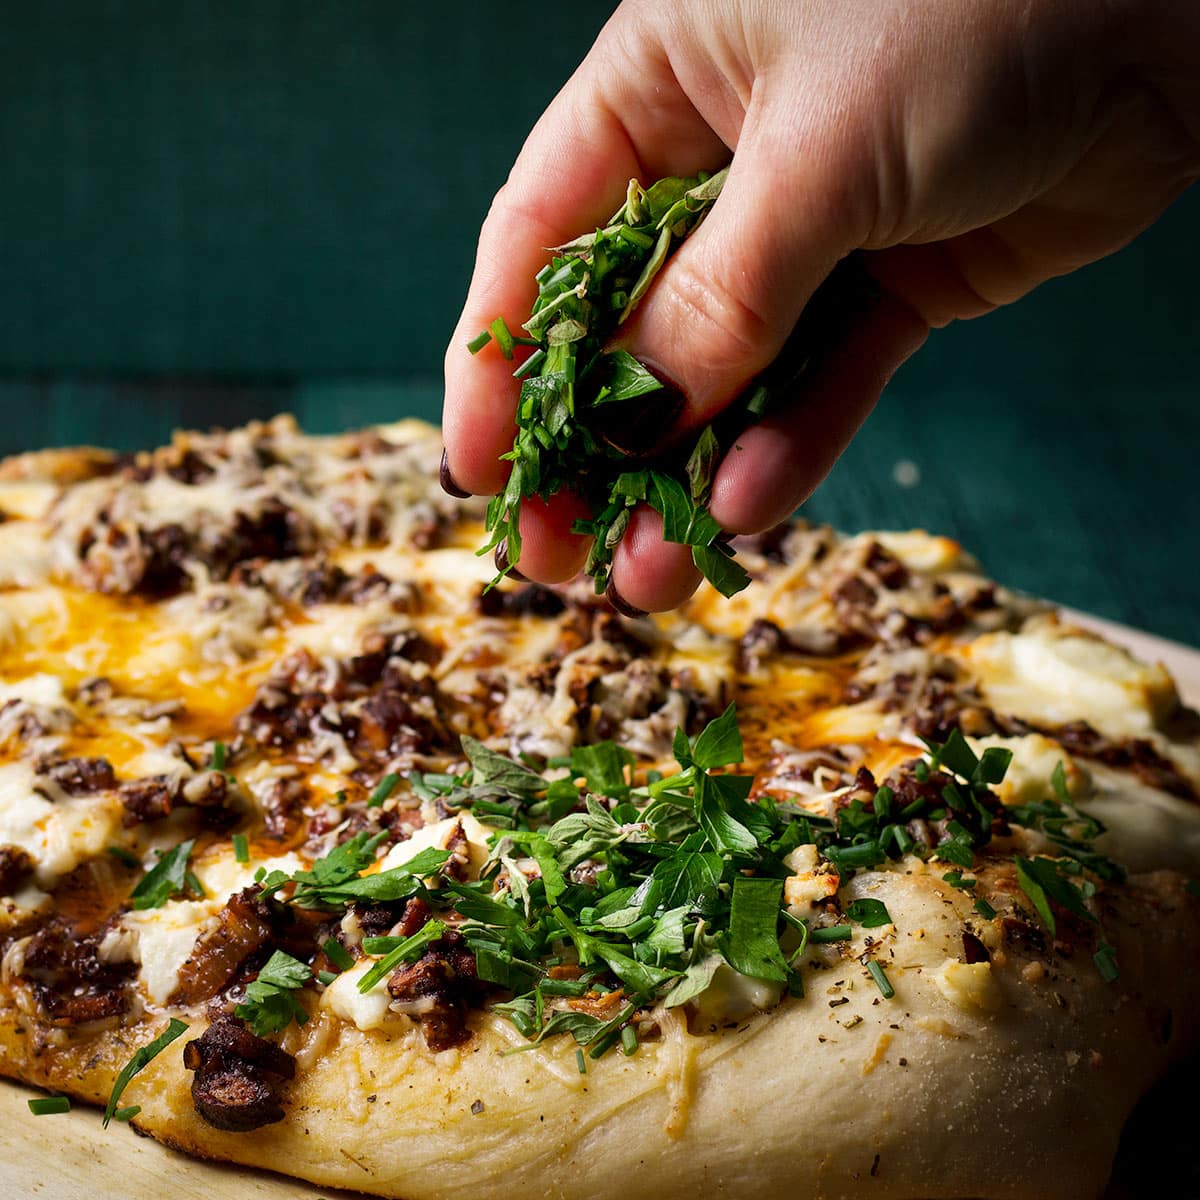 Sprinkling fresh herbs over a warm from the oven mushroom pizza.